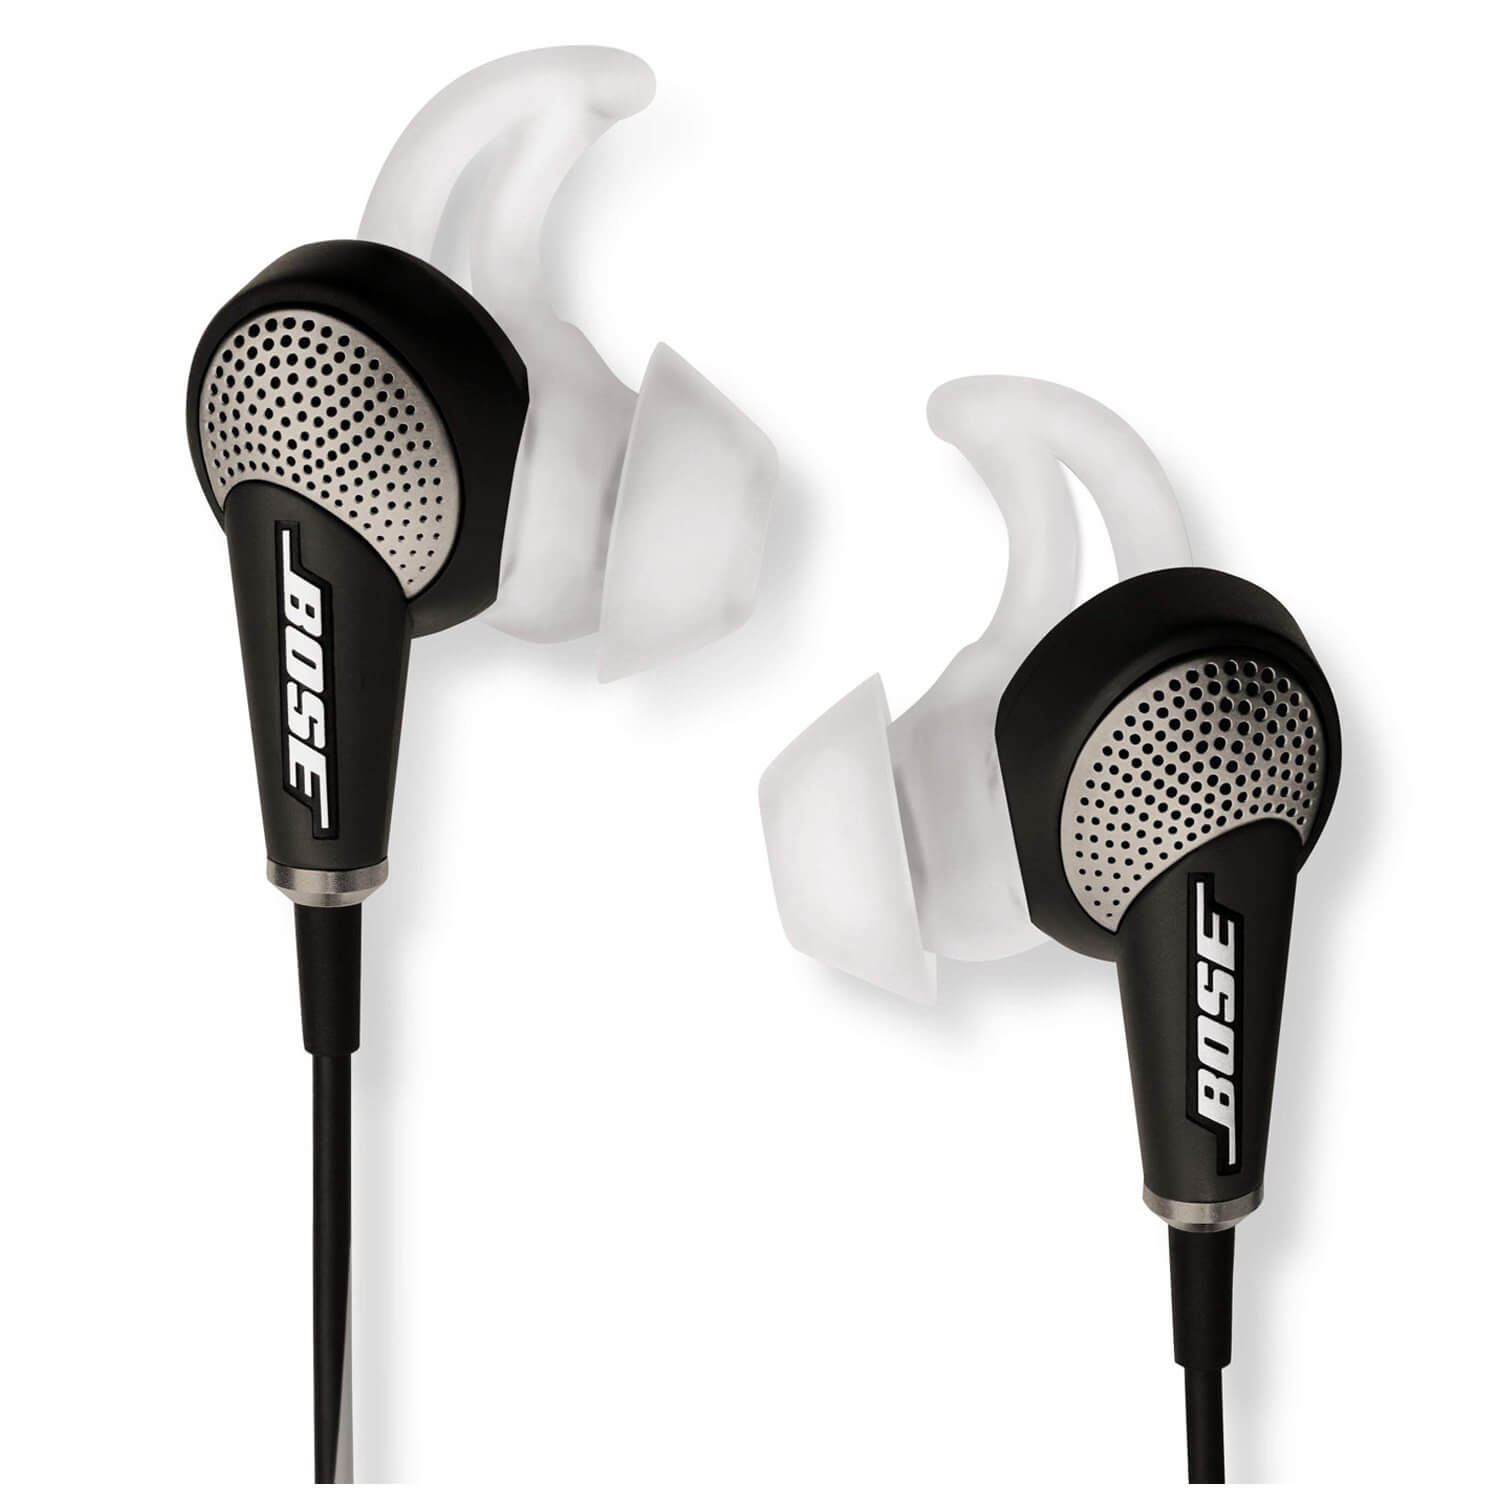 Best 4 Bose Noise-Cancelling Earbuds